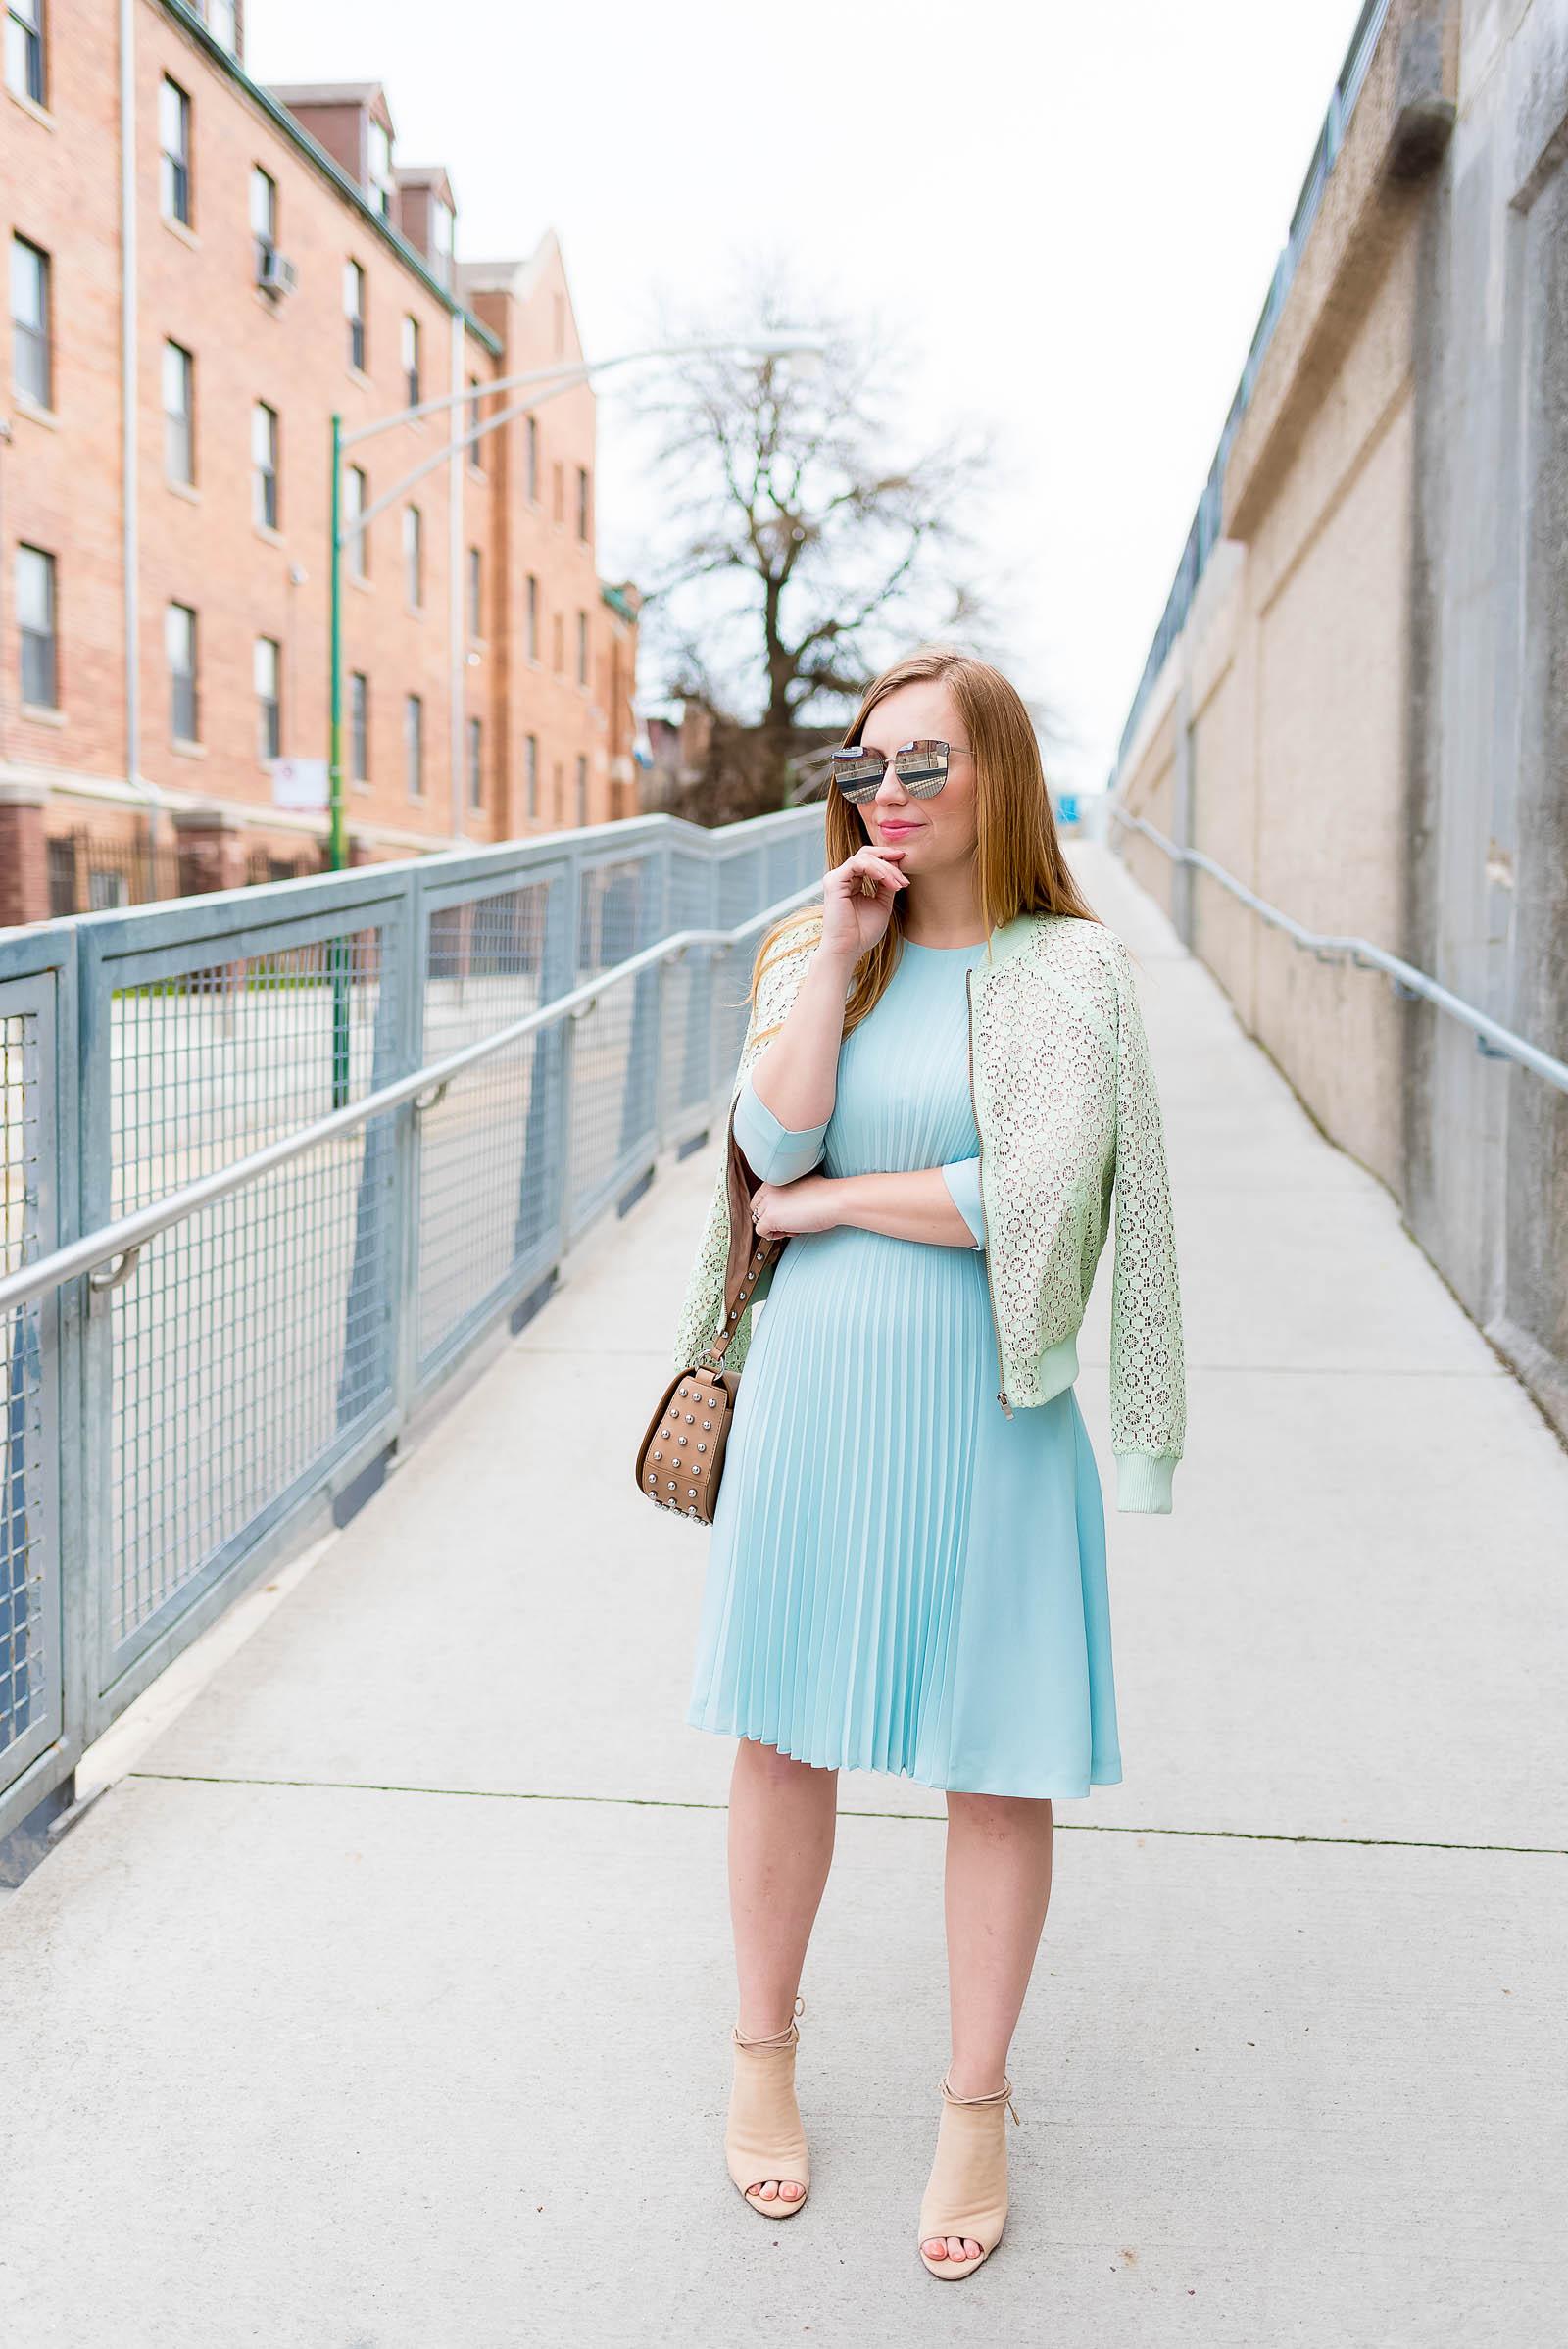 Hugo Boss Duck Blue Pleated Dress, Victoria Beckham for Target Lace Mint Green Bomber Jacket, Aquazzura Mayfair Booties in Nude Suede, Alexander Wang Lia Mini Studded Bag